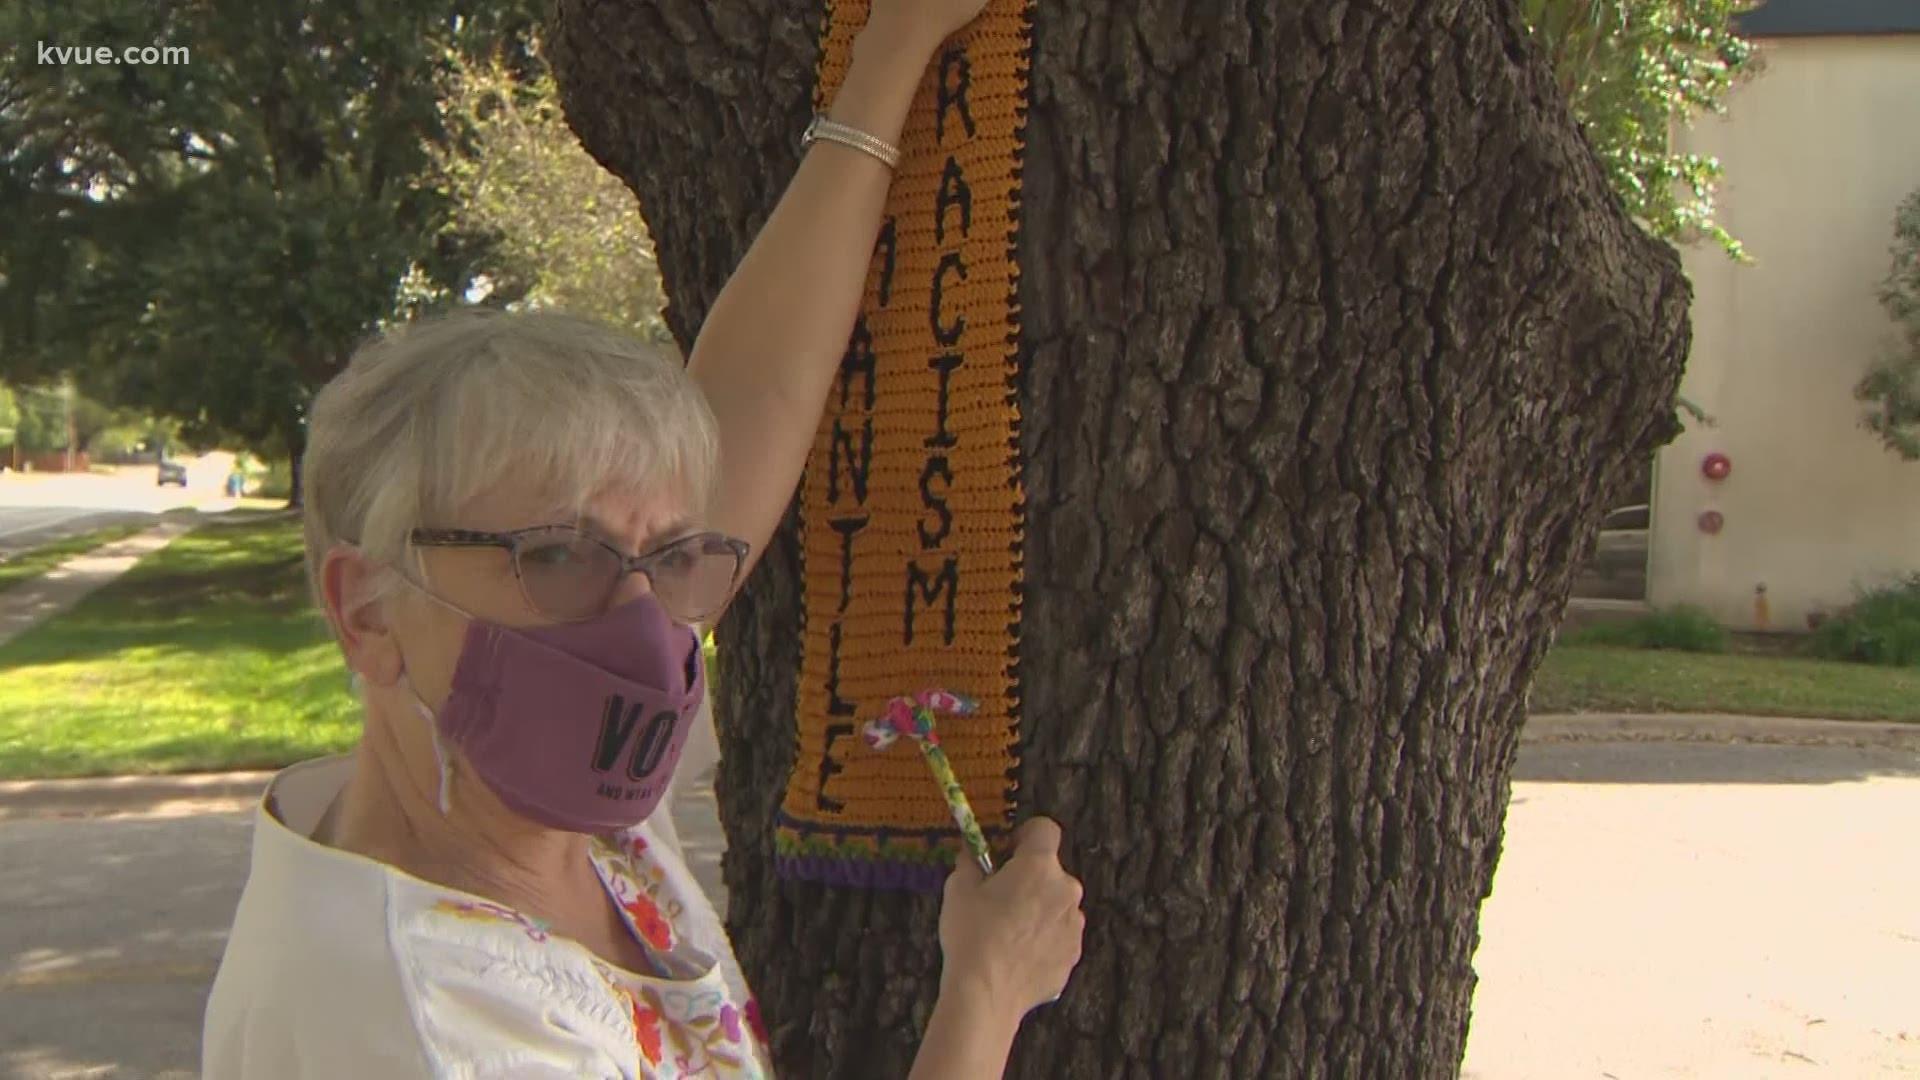 One Central Austin woman picked up her crochet hook and decided she wanted to help make a difference.